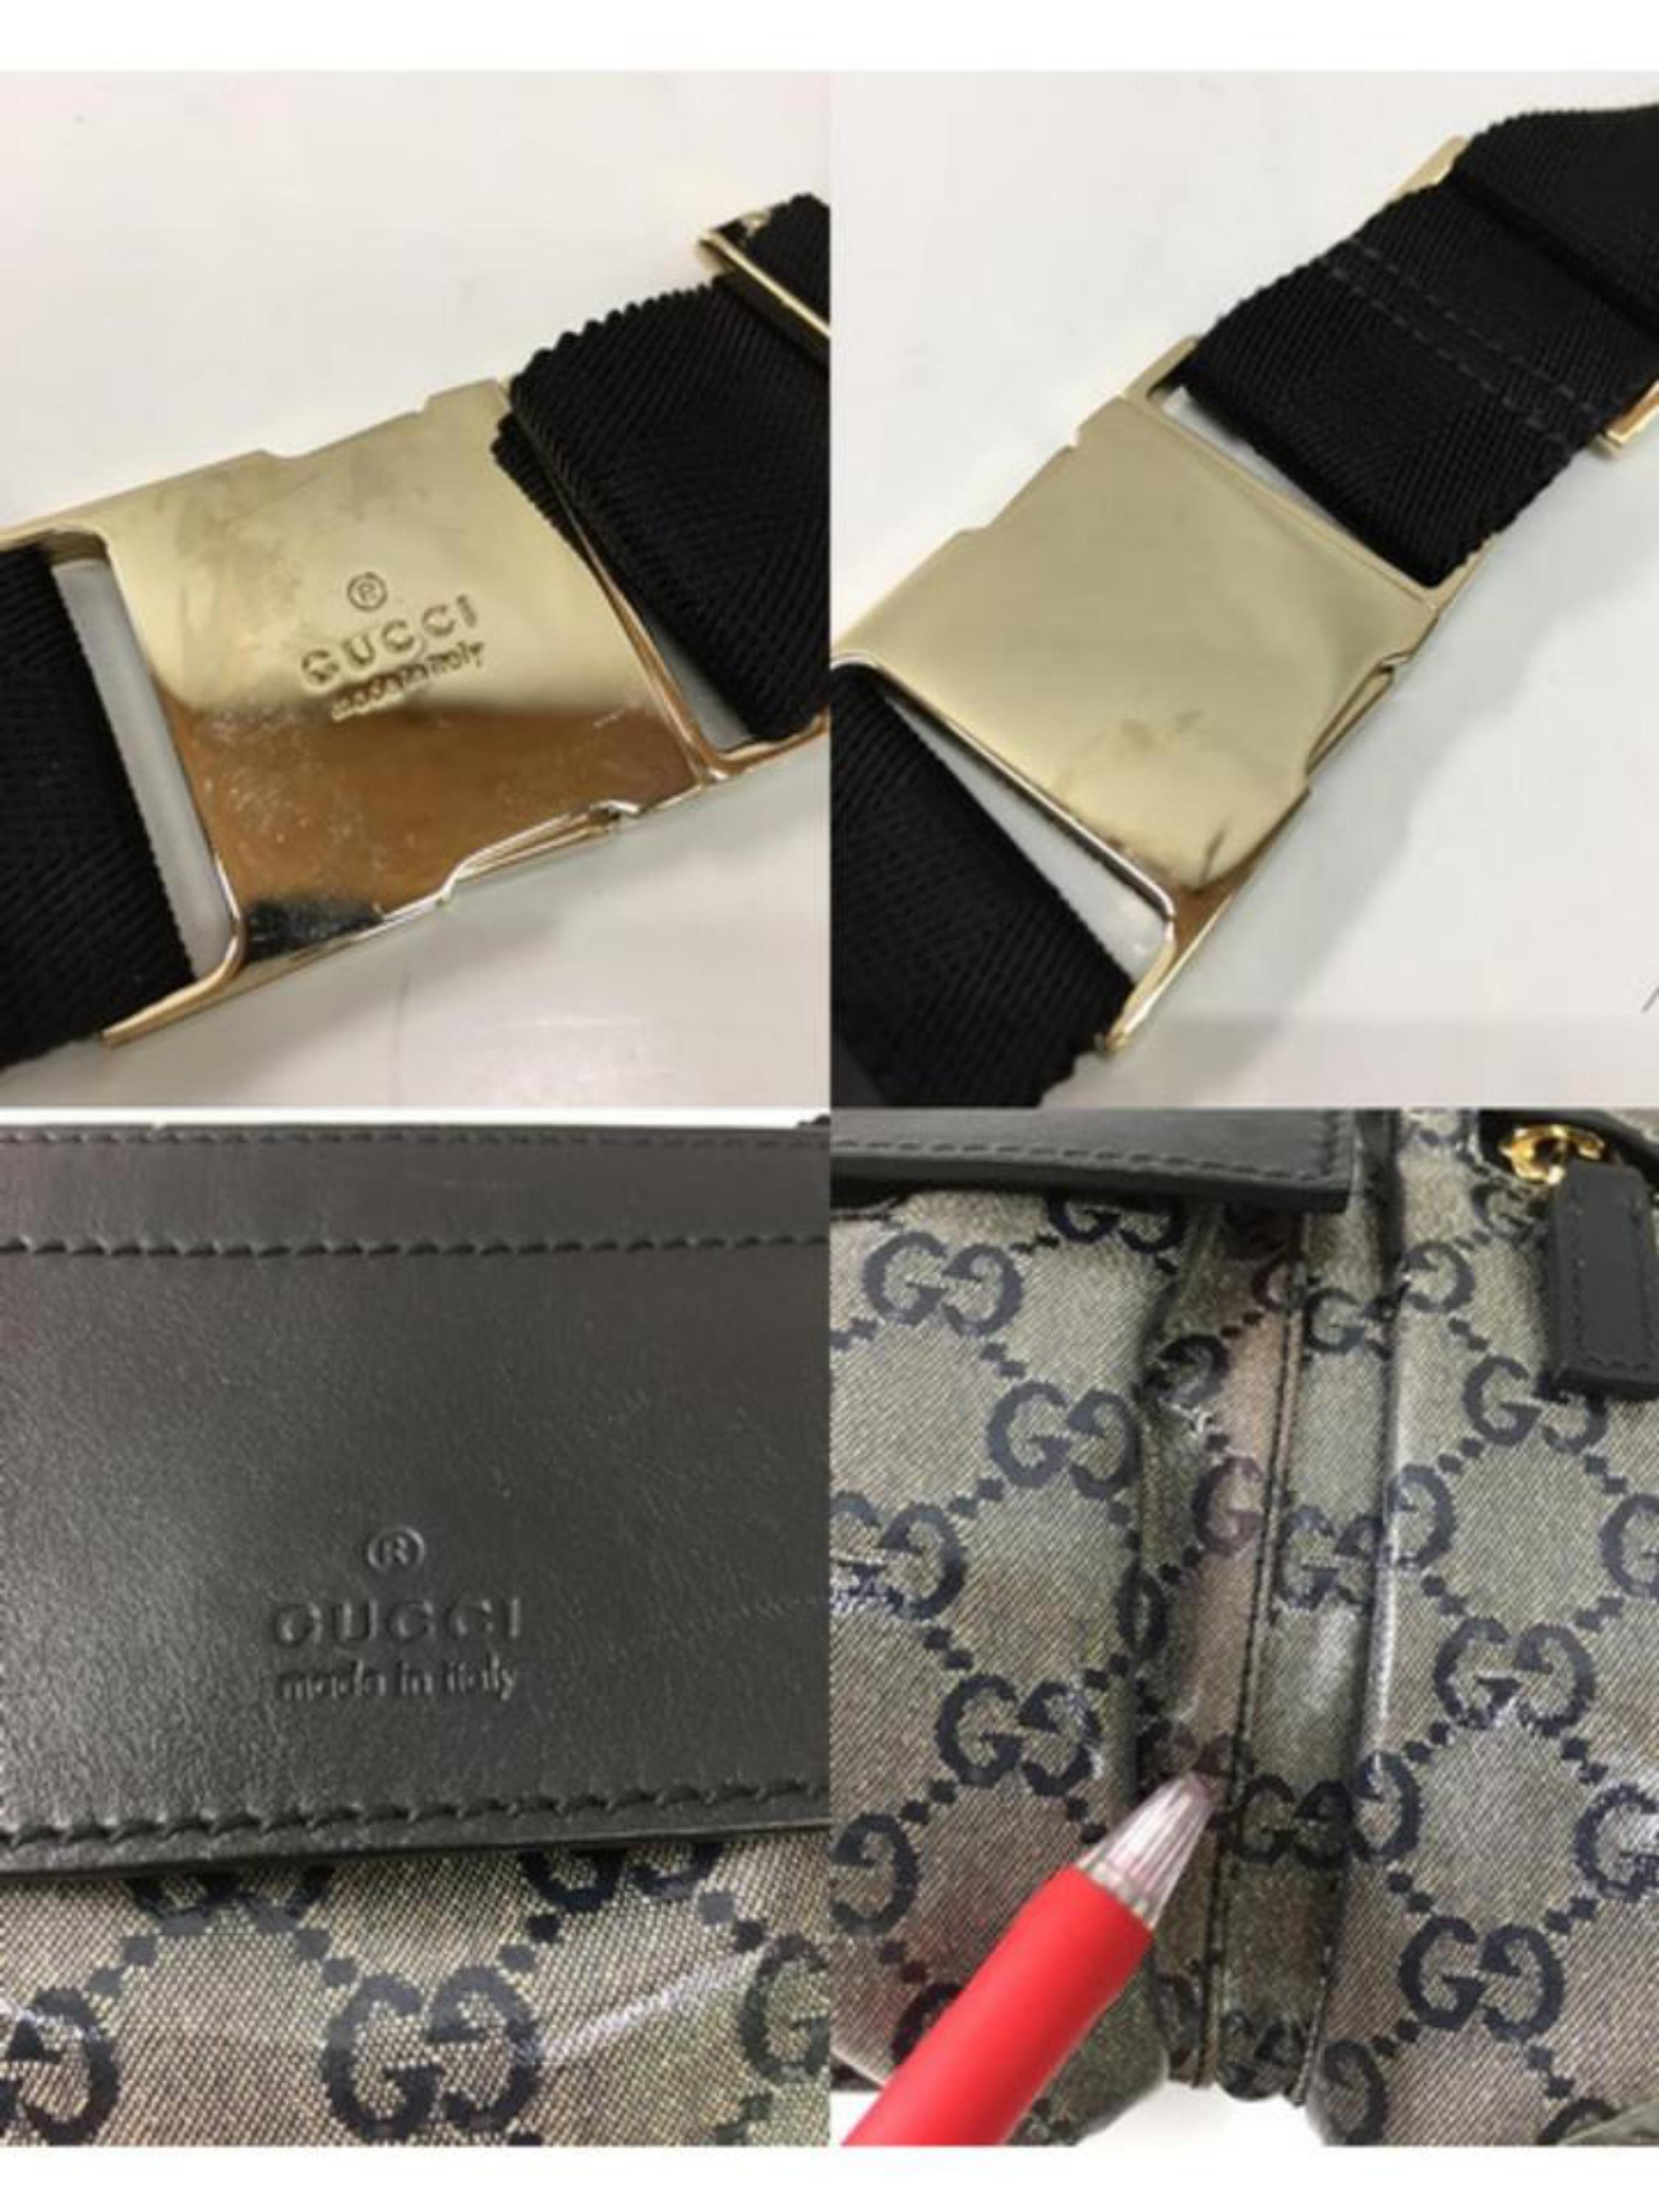 Gucci Crystal Monogram Gg Belt Fanny Pack 228312 Black Coated Canvas Cross Body  In Good Condition For Sale In Forest Hills, NY